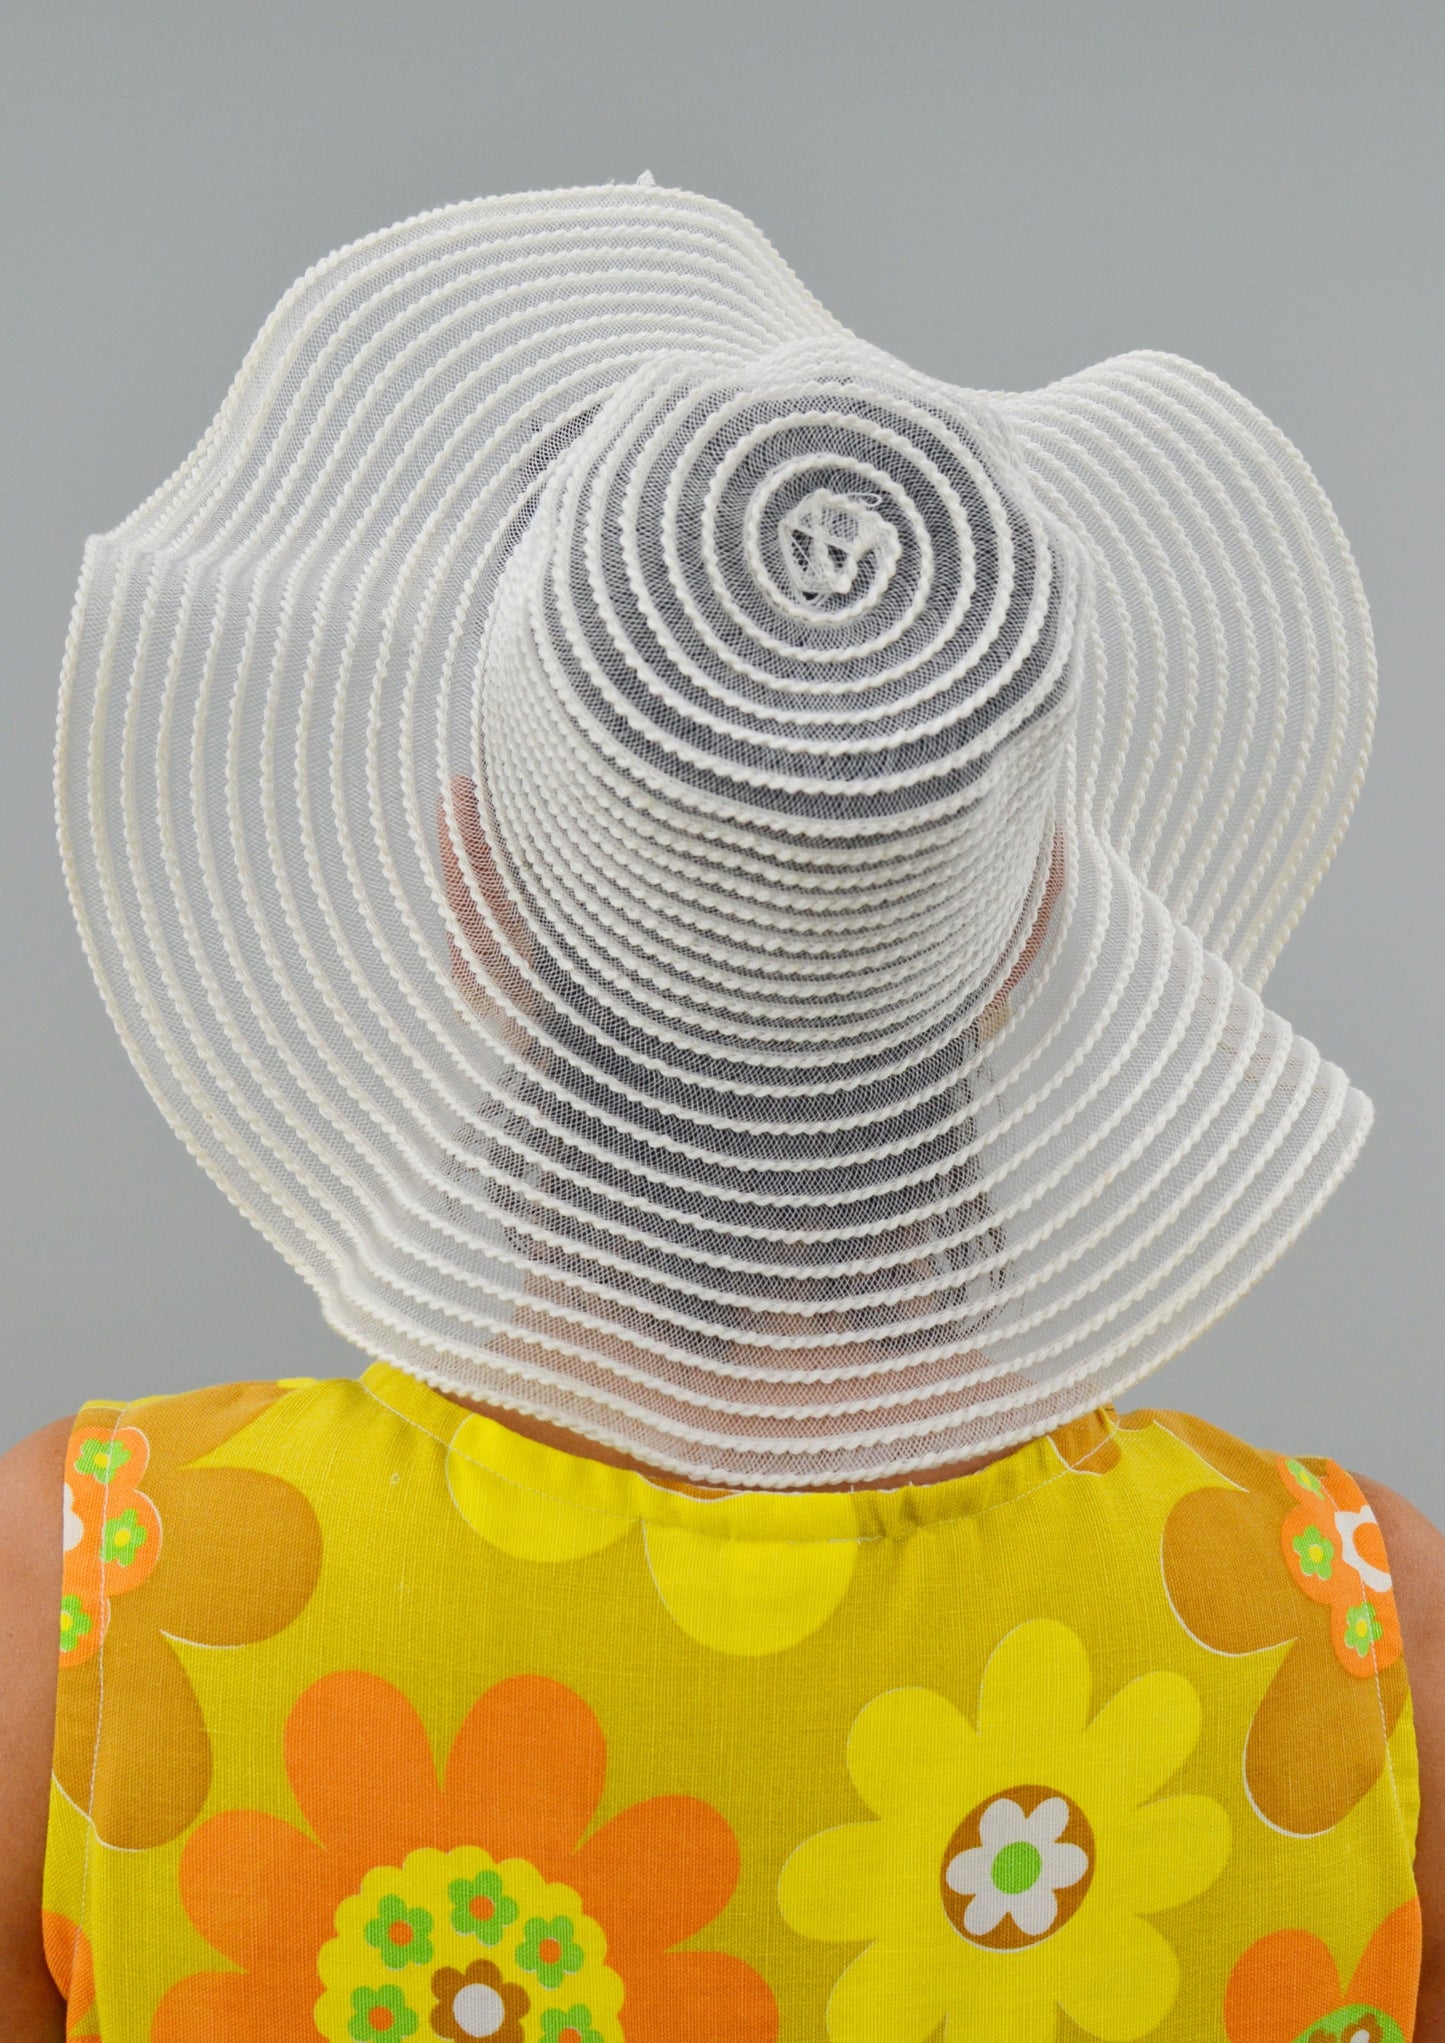 The Tight Rope Wavy Floppy Hat, Vintage 1970's Hat